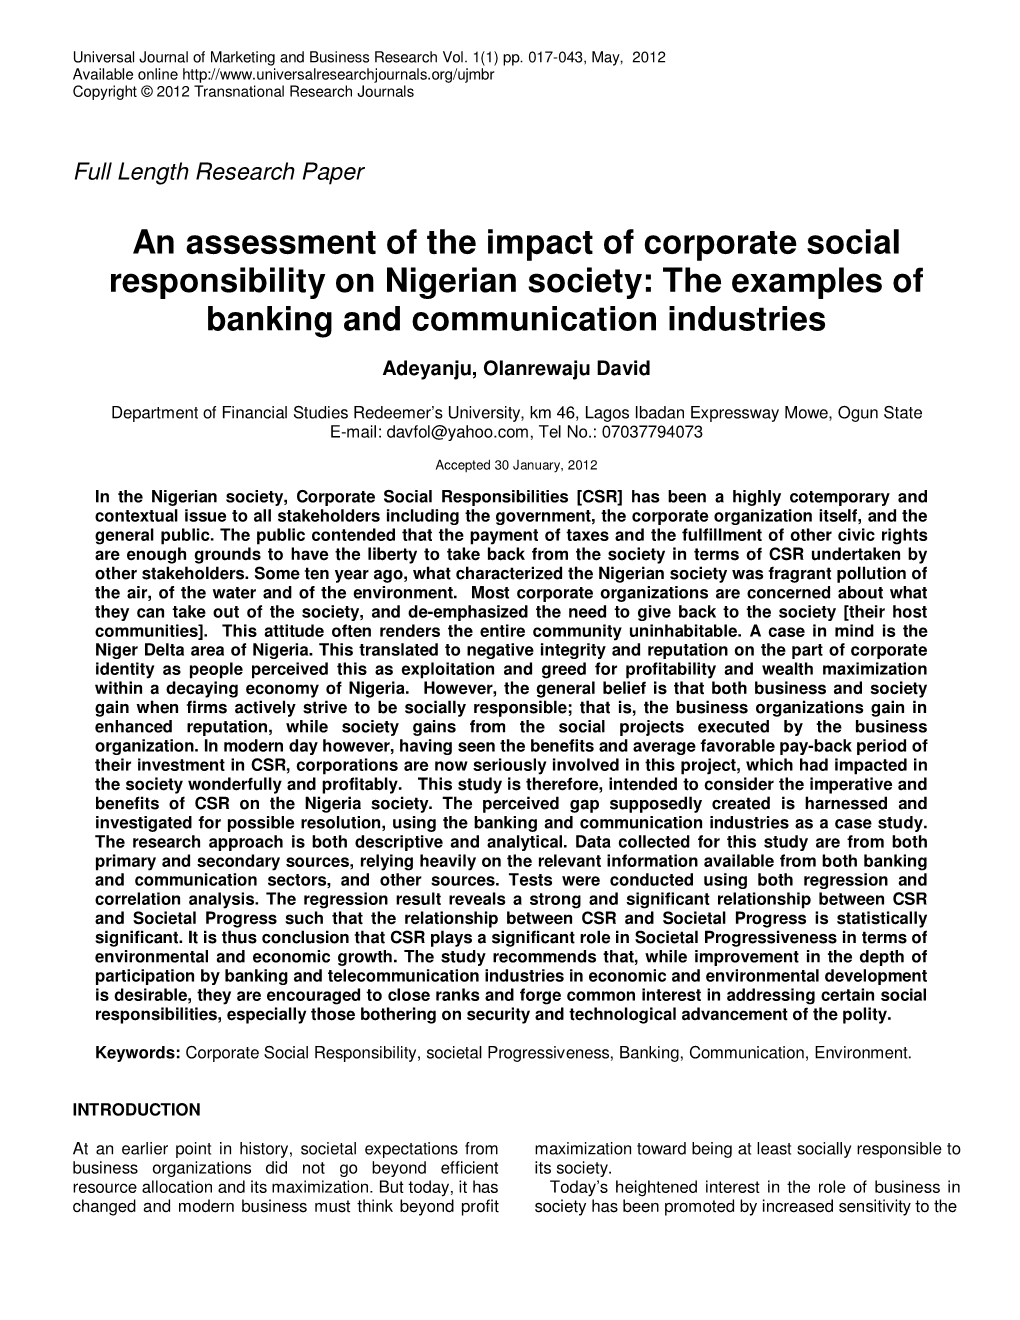 An Assessment of the Impact of Corporate Social Responsibility on Nigerian Society: the Examples of Banking and Communication Industries